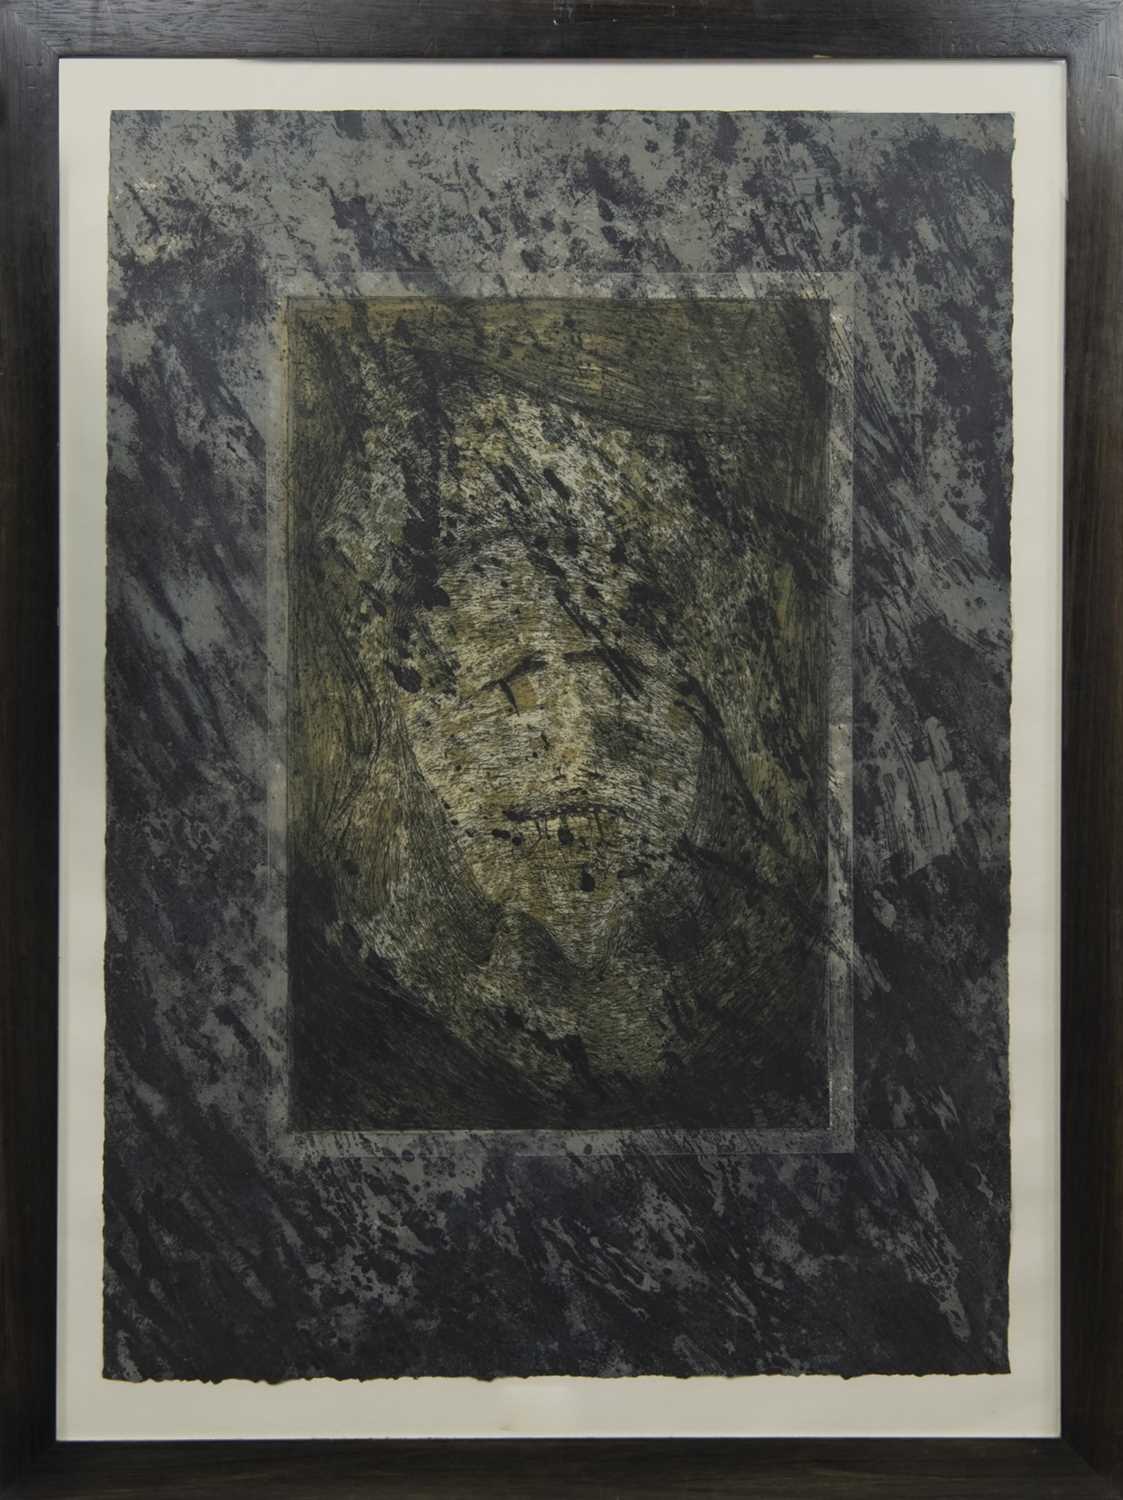 Lot 18 - ELEGY TO CAPTAIN FERGUSON, FROM A NIGHT OF ISLANDS, 1991, AN ETCHING BY WILL MACLEAN